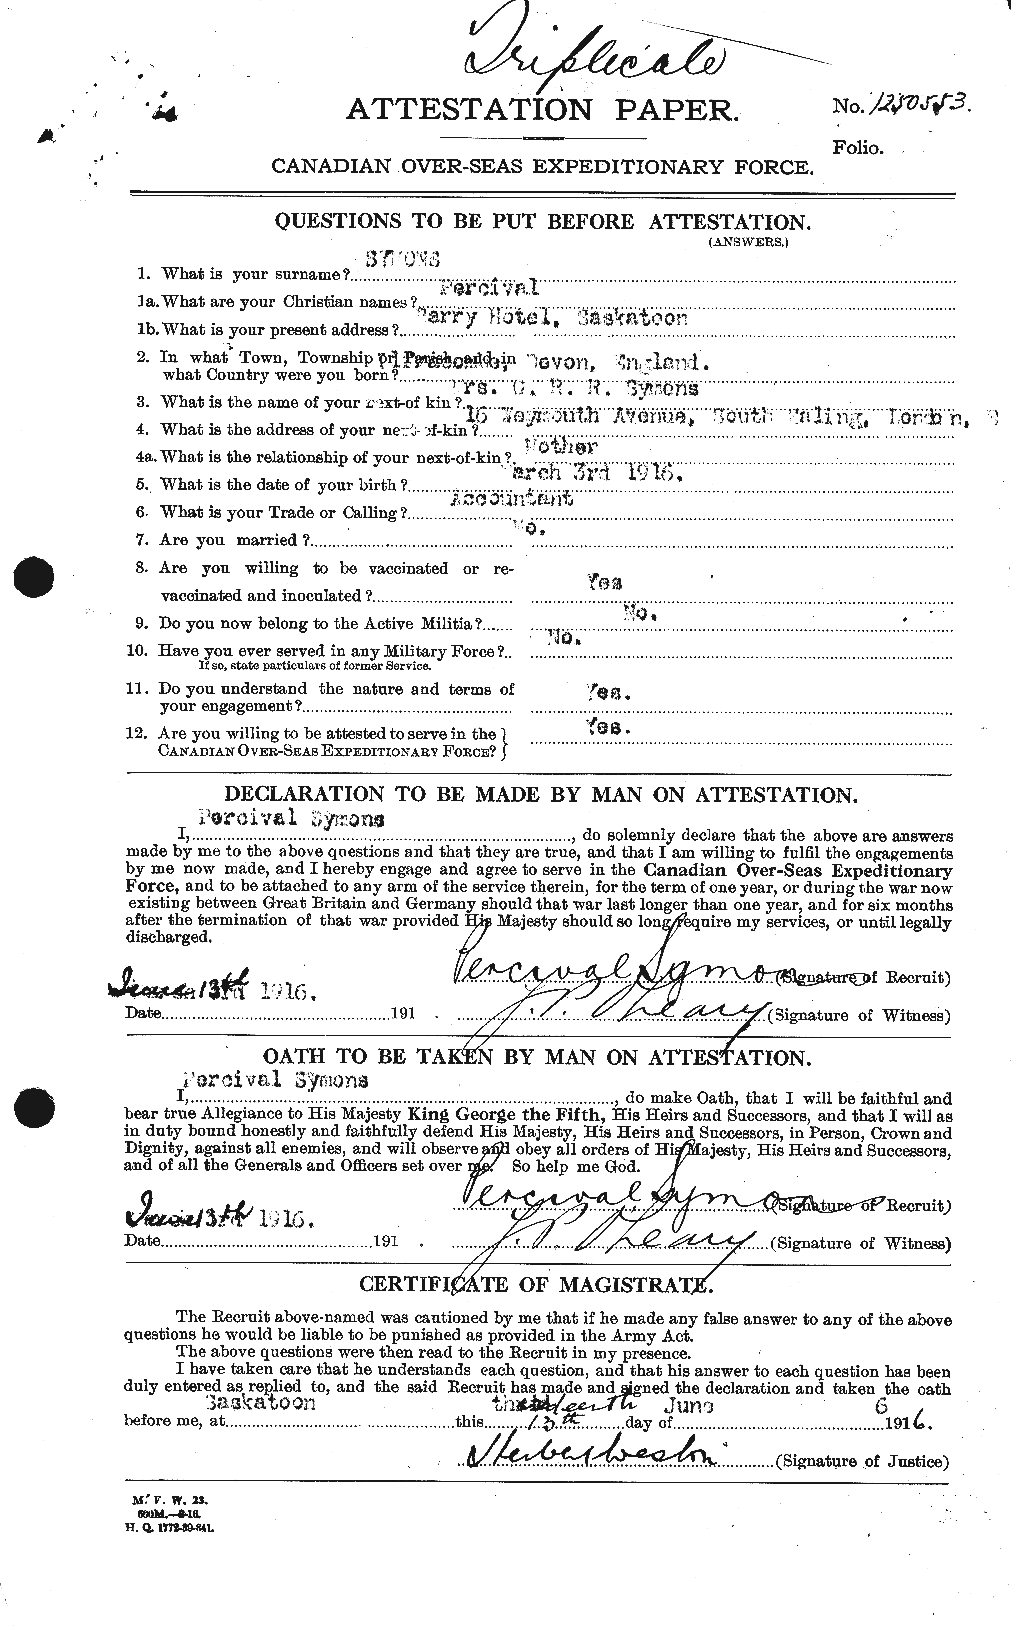 Personnel Records of the First World War - CEF 129039a